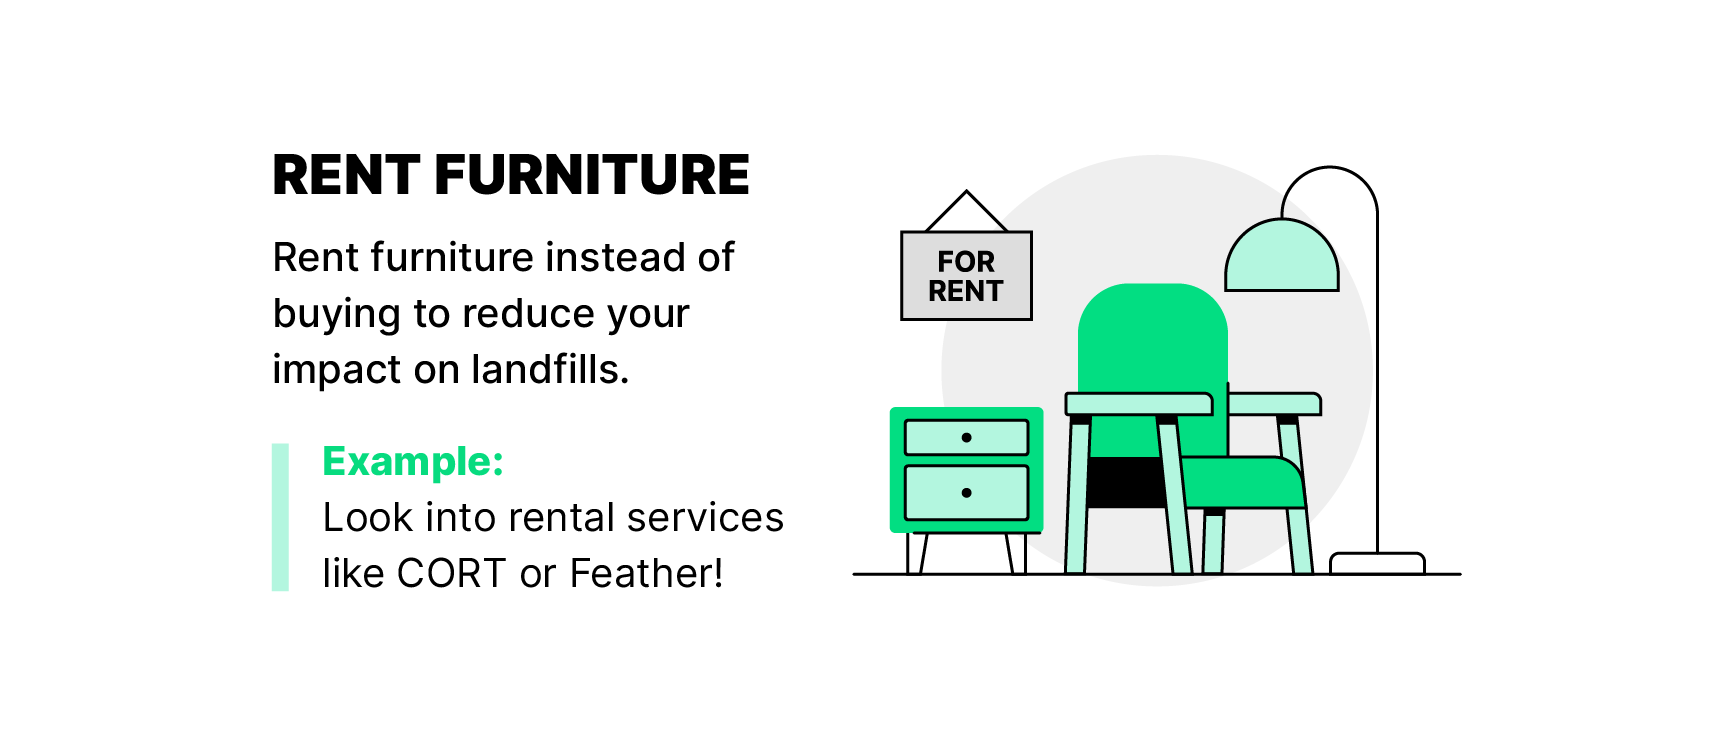 Illustration of pieces of furniture with a for rent sign nearby